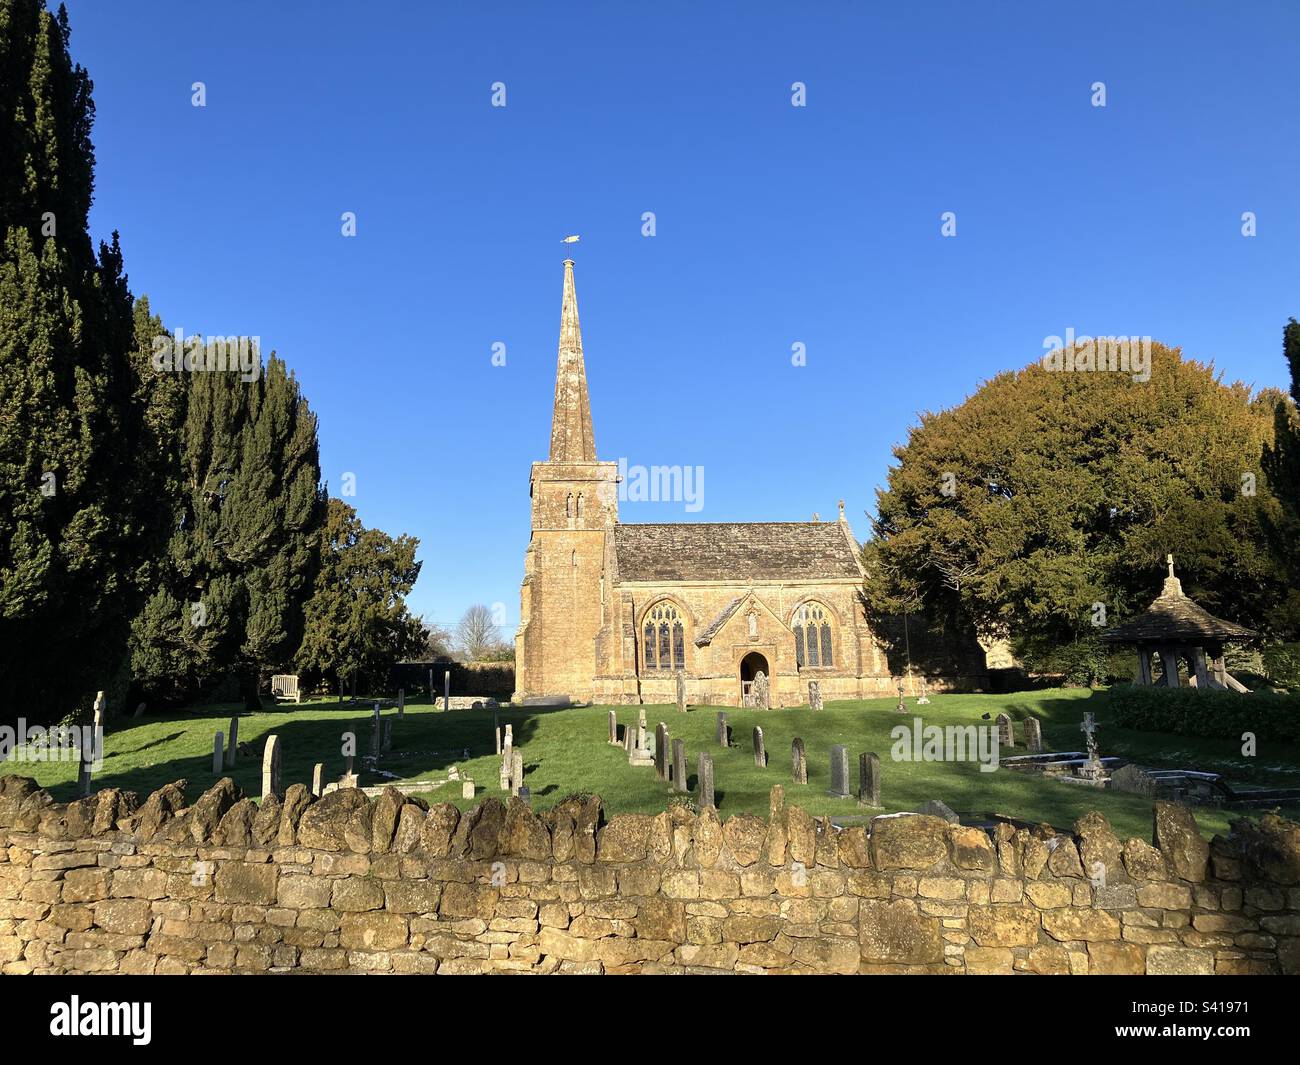 Church of St Mary, Compton Pauncefoot, Somerset, England. 15th Century Anglican Church, a Grade 2 listed building. Stock Photo